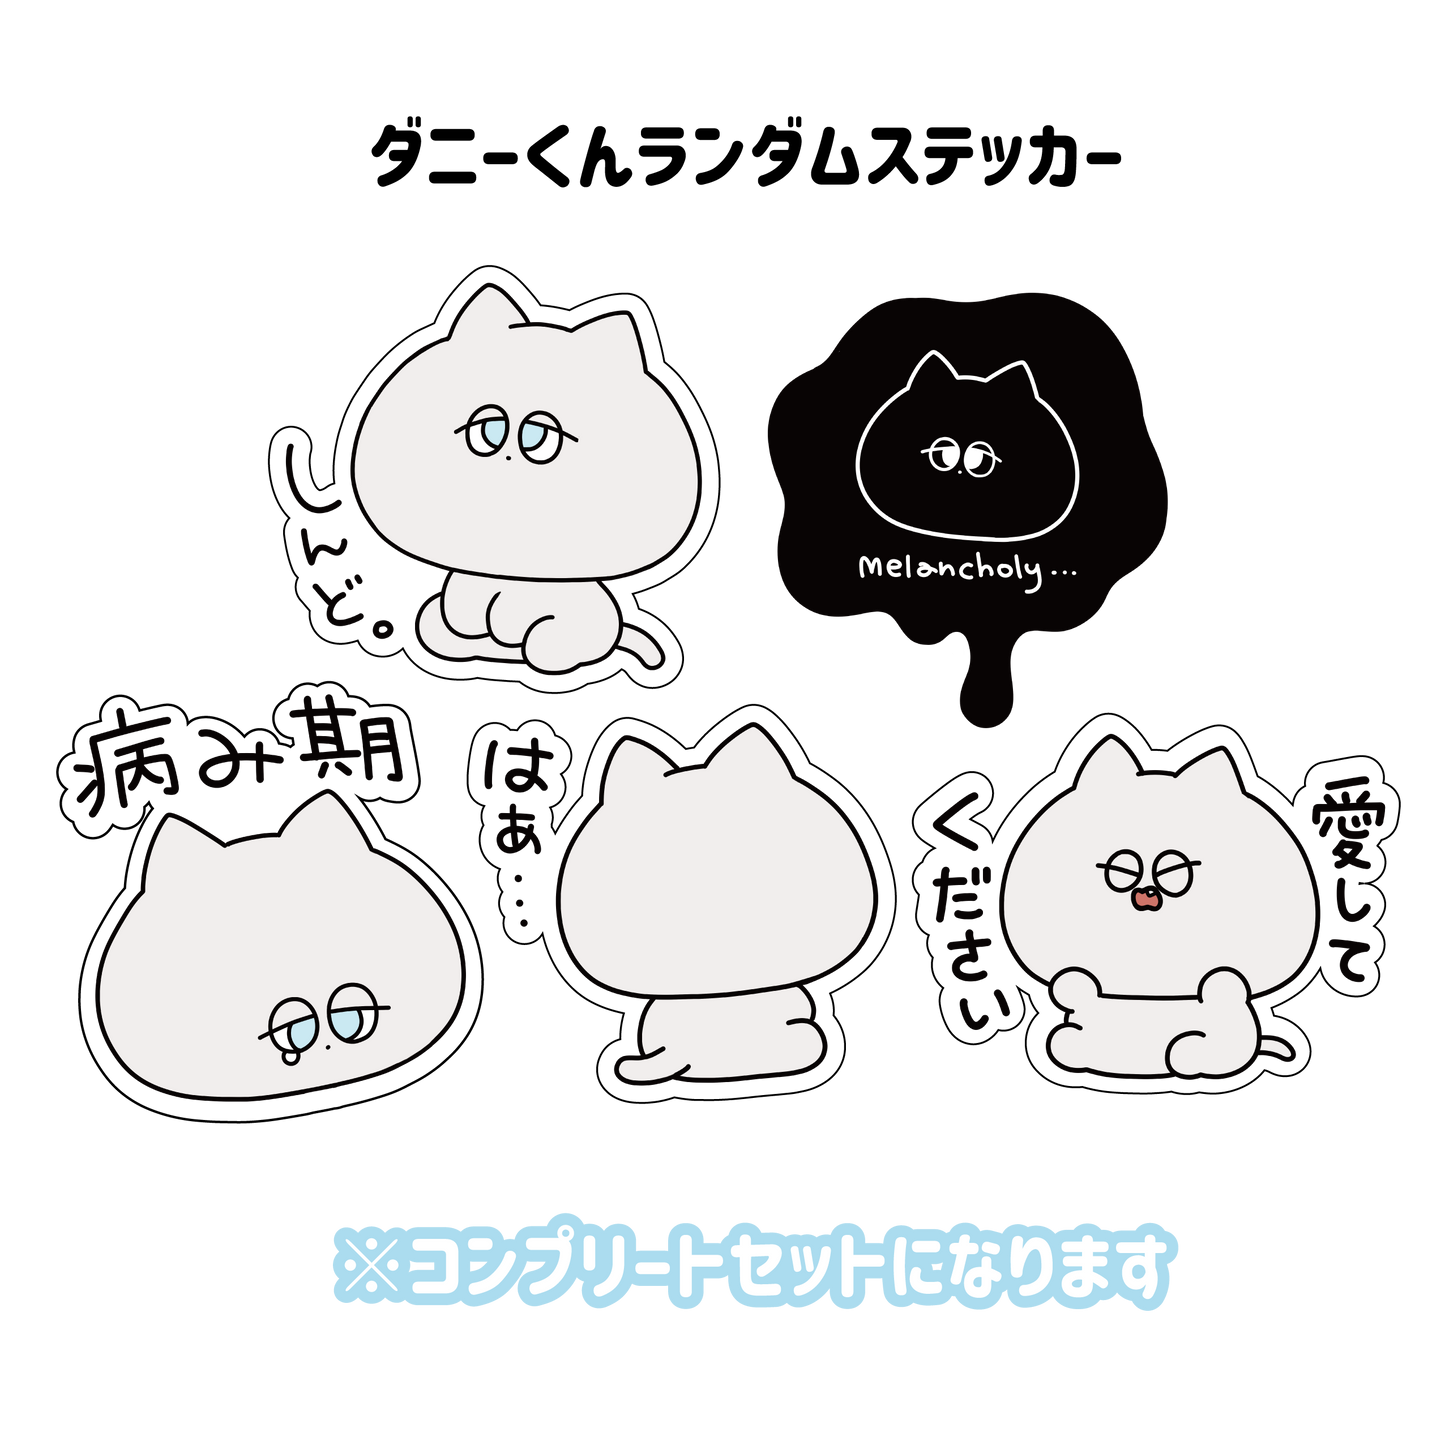 [Asamimi-chan] Danny-kun random sticker complete set (5 types in total) [Made to order]